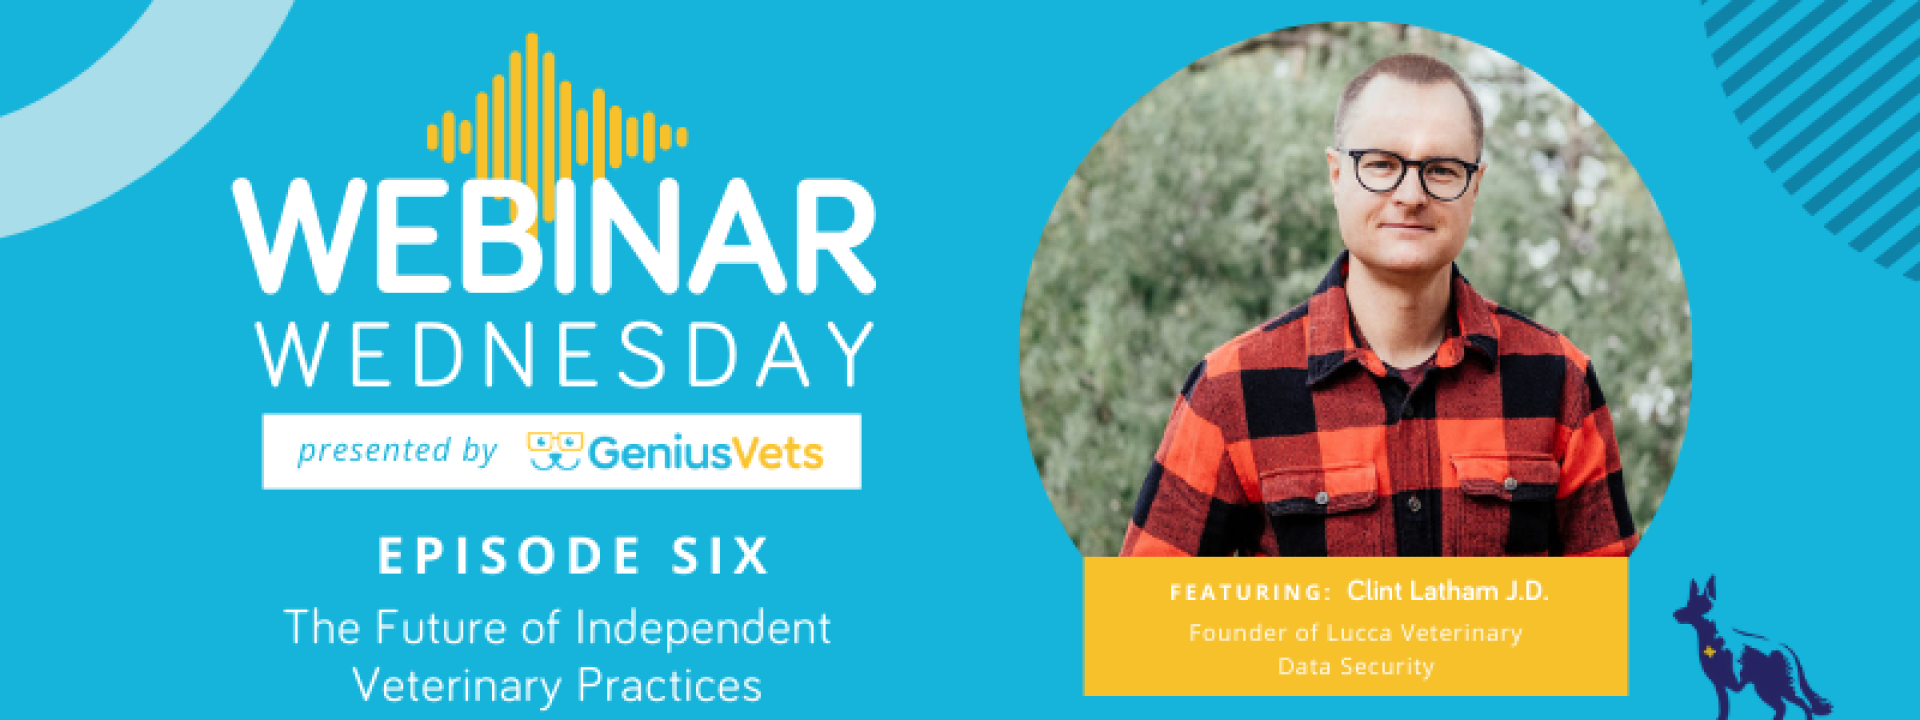 The Future of Independent Veterinary Practices With Clint Latham